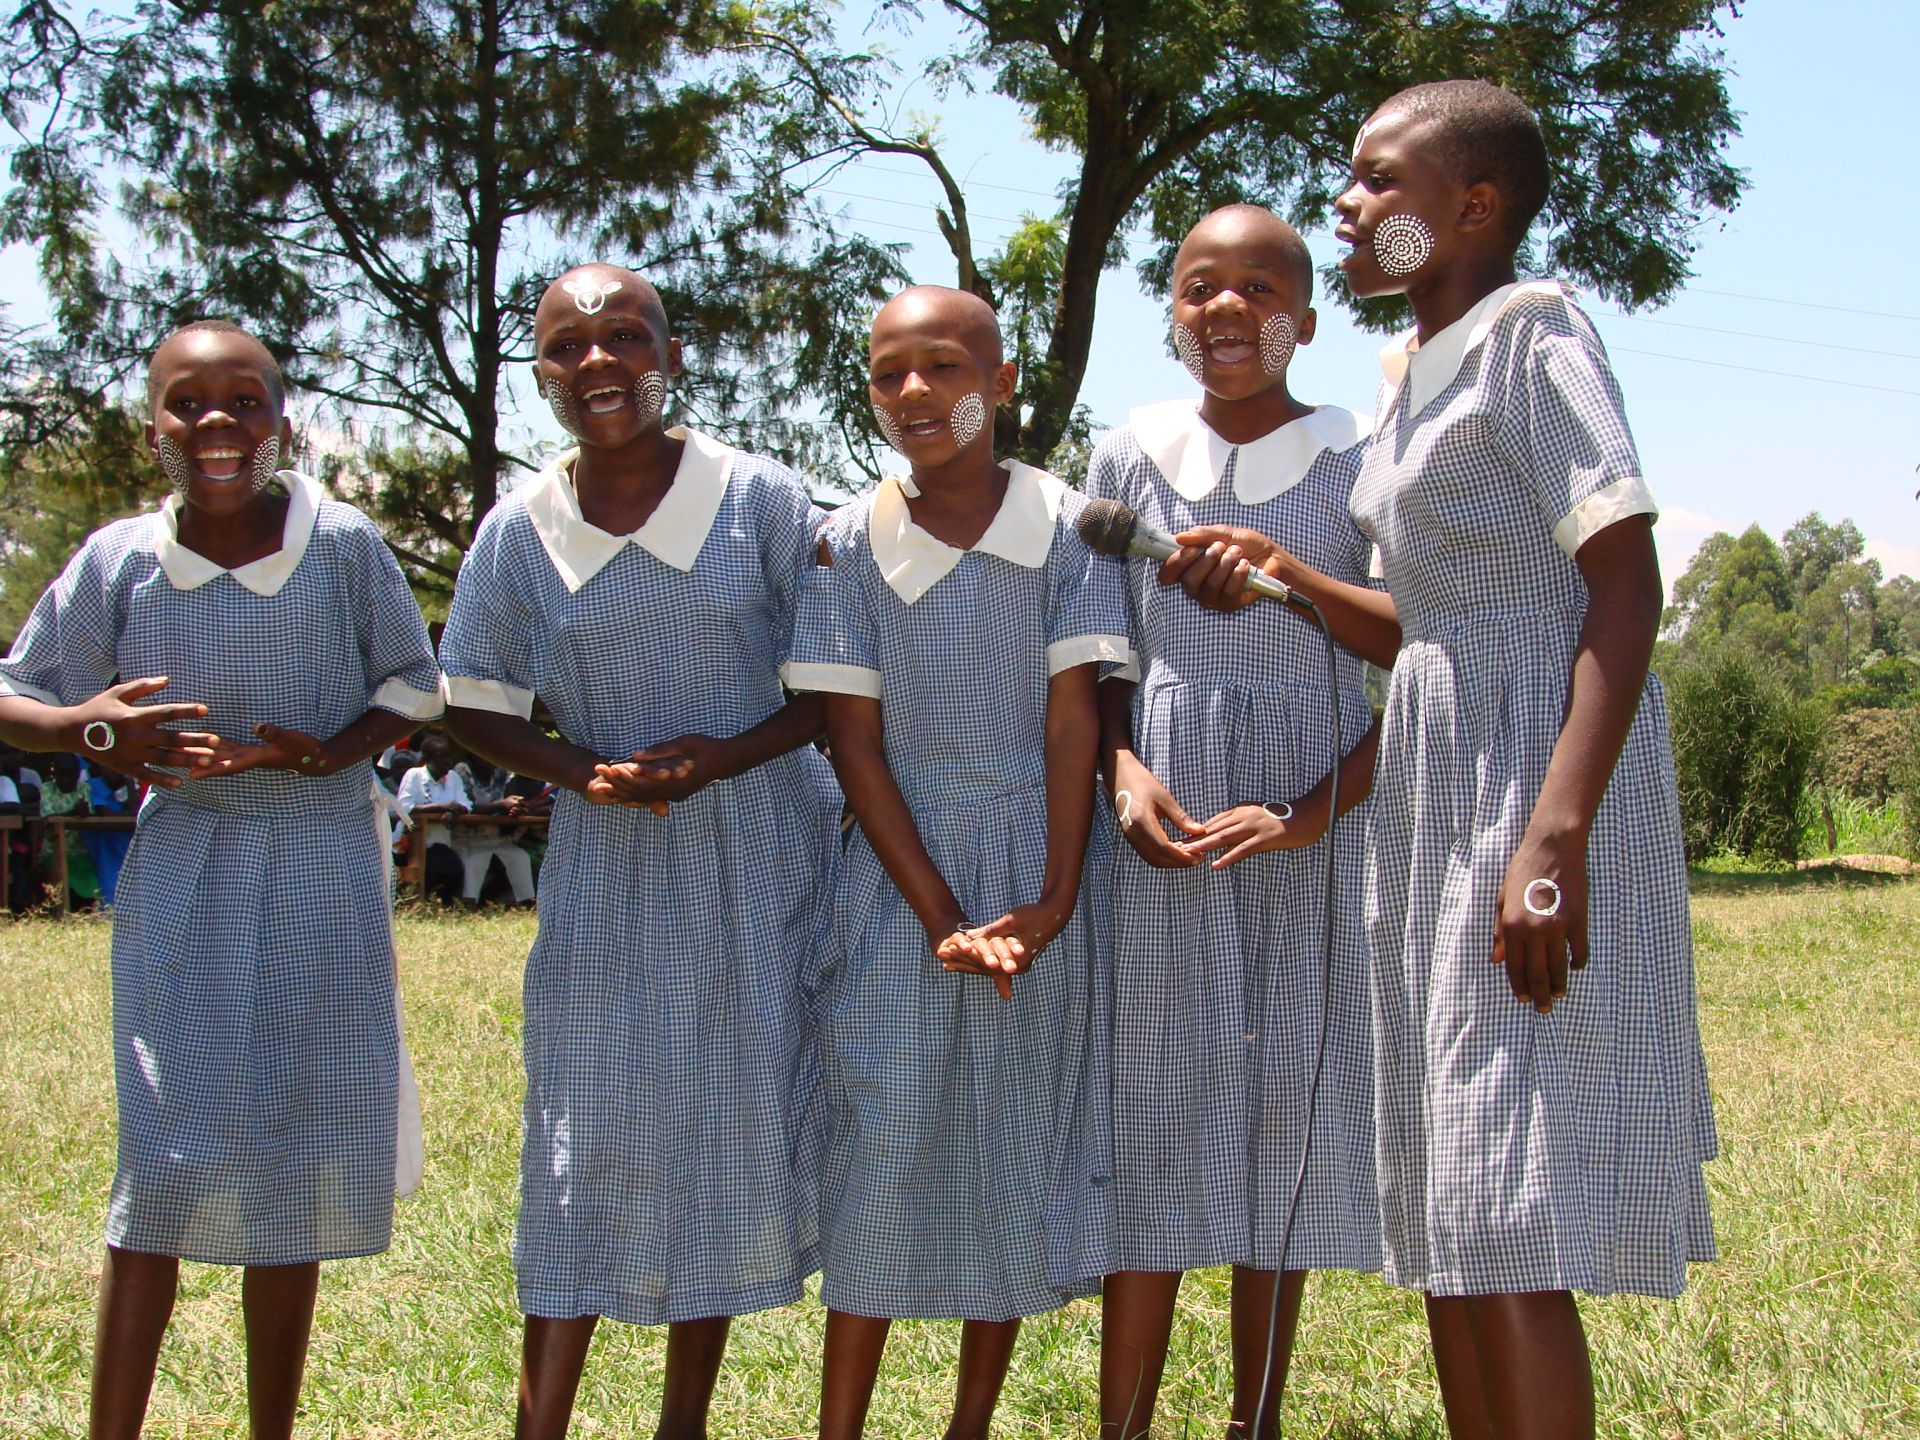 Girls from Muraka Primary School, Kakamega County, reciting a poem on traditional foods during a foodways fair.